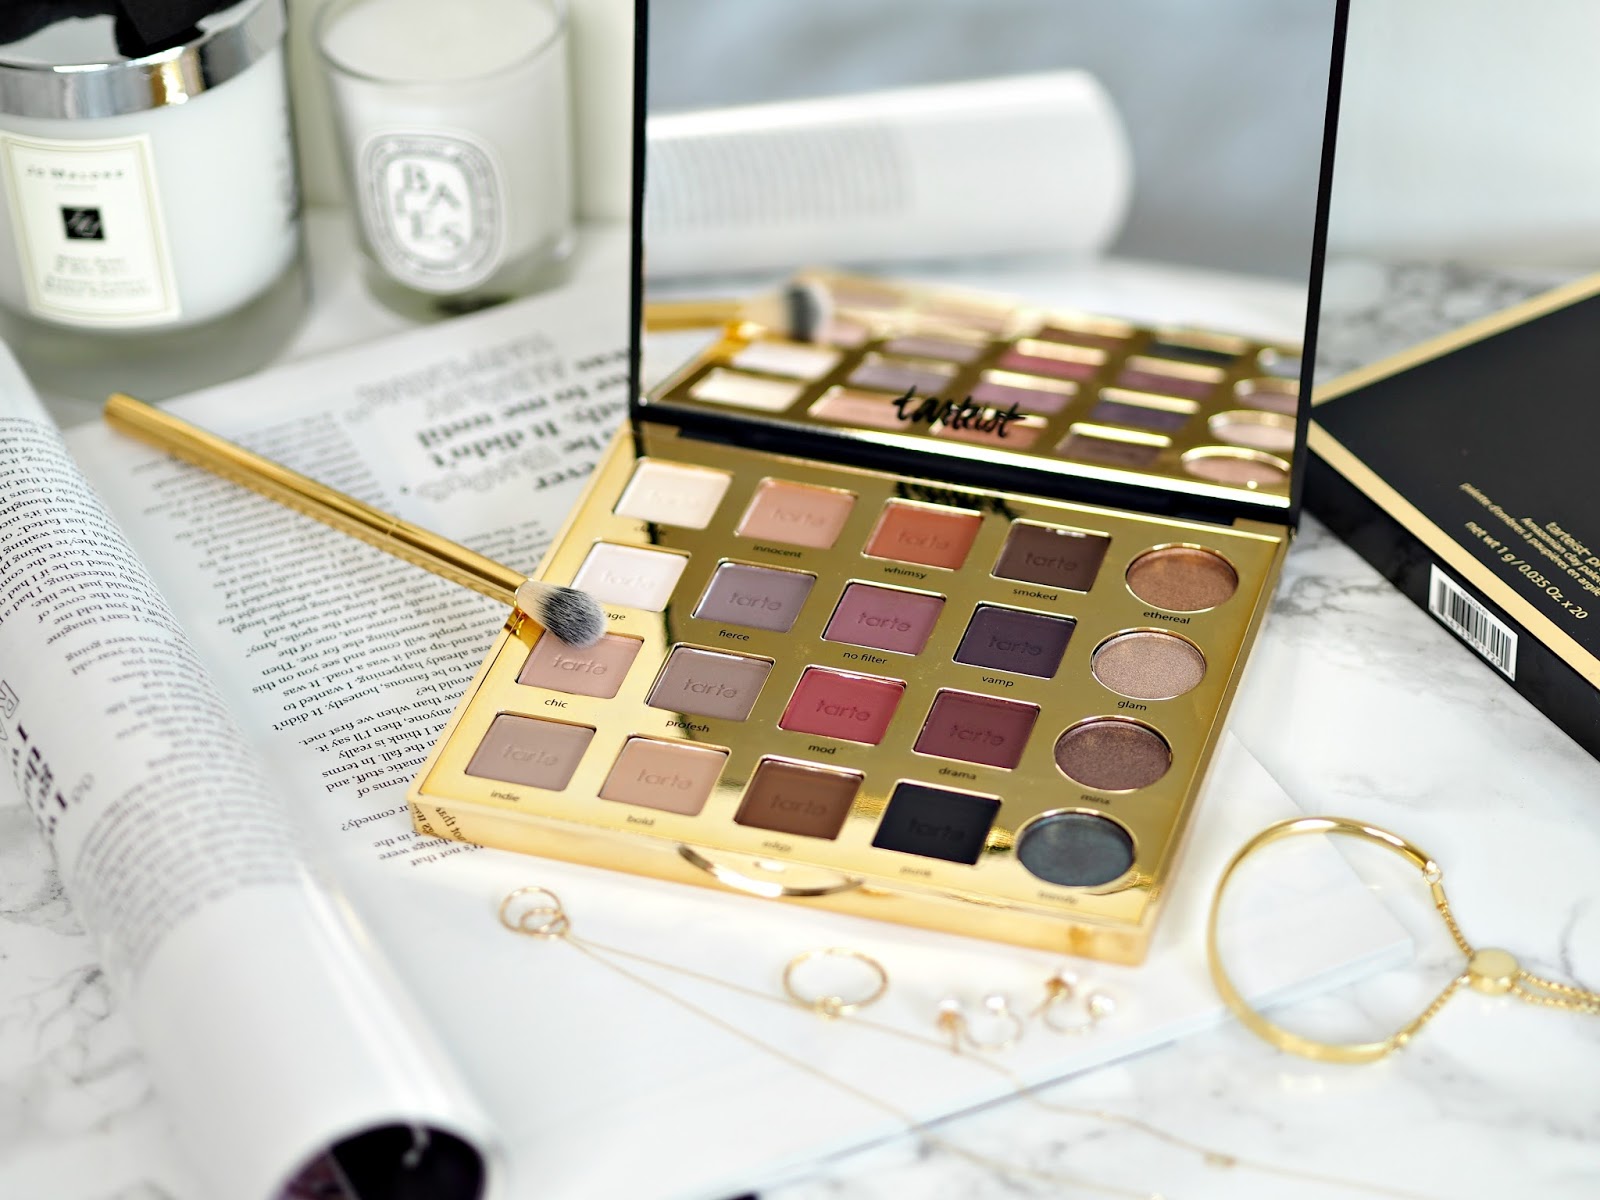 Tarte Pro Amazonian Clay Eyeshadow Palette Review & Swatches